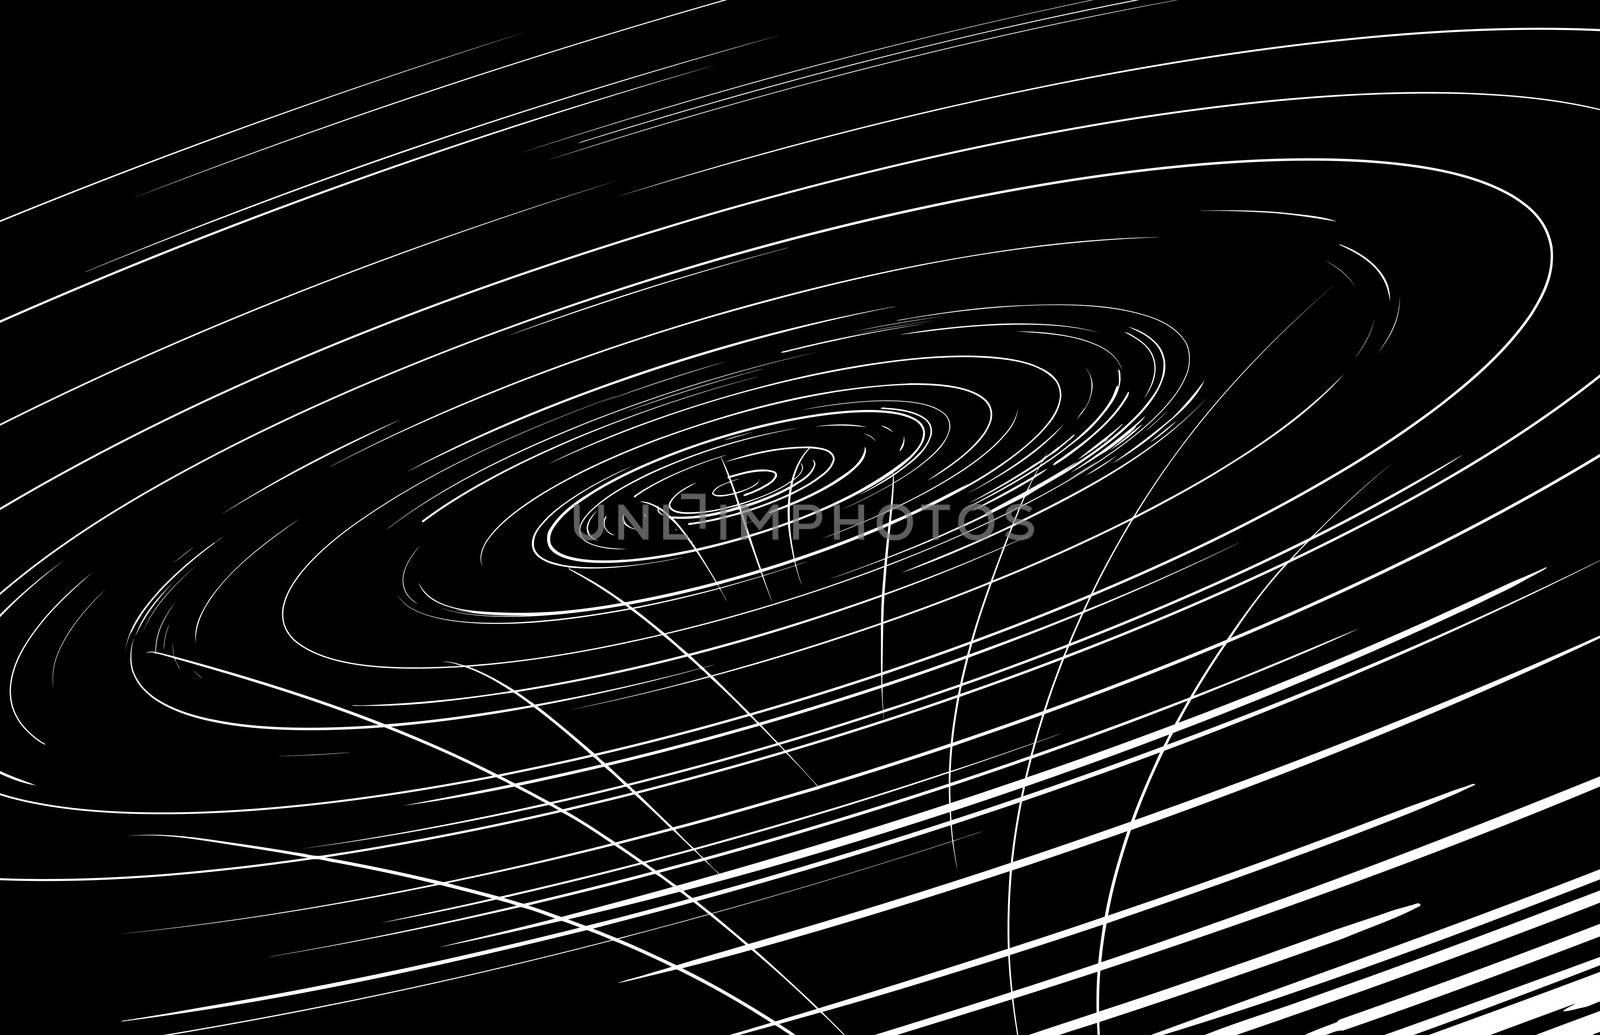 Black Hole Outline Drawing by TheBlackRhino